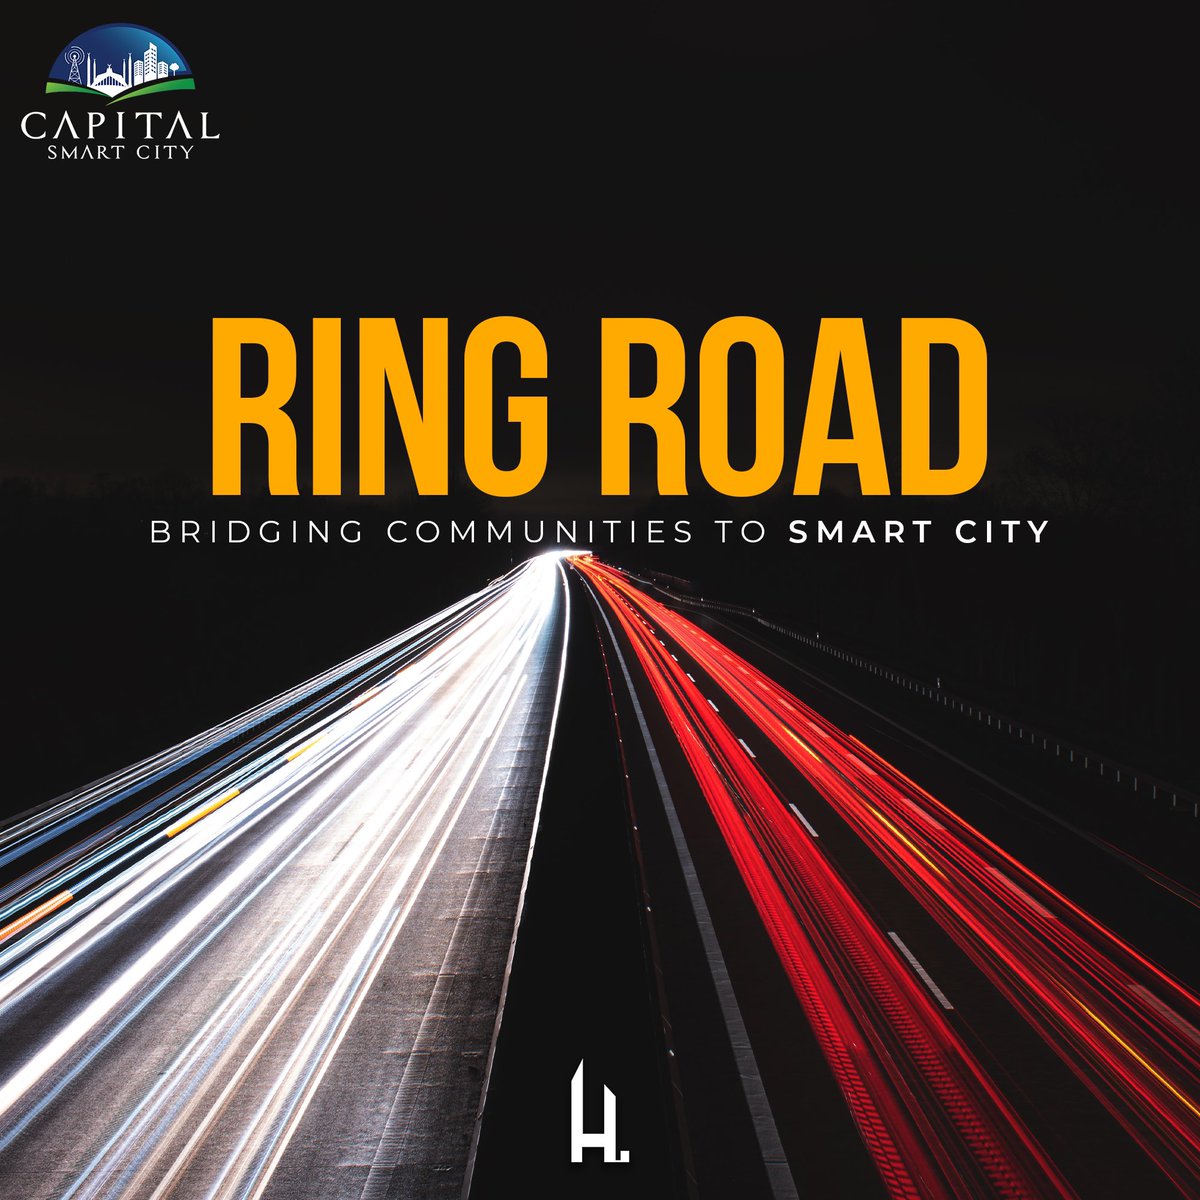 As Rawalpindi Ring Road unfolds its transformative path, envision a future where seamless connectivity intertwines with the innovative landscape of Capital Smart City. 

#InvestInGrowth #RoadToOpportunity #CapitalSmartCity #HDot #FindYourLocus #HDotExperience #doitthedotway